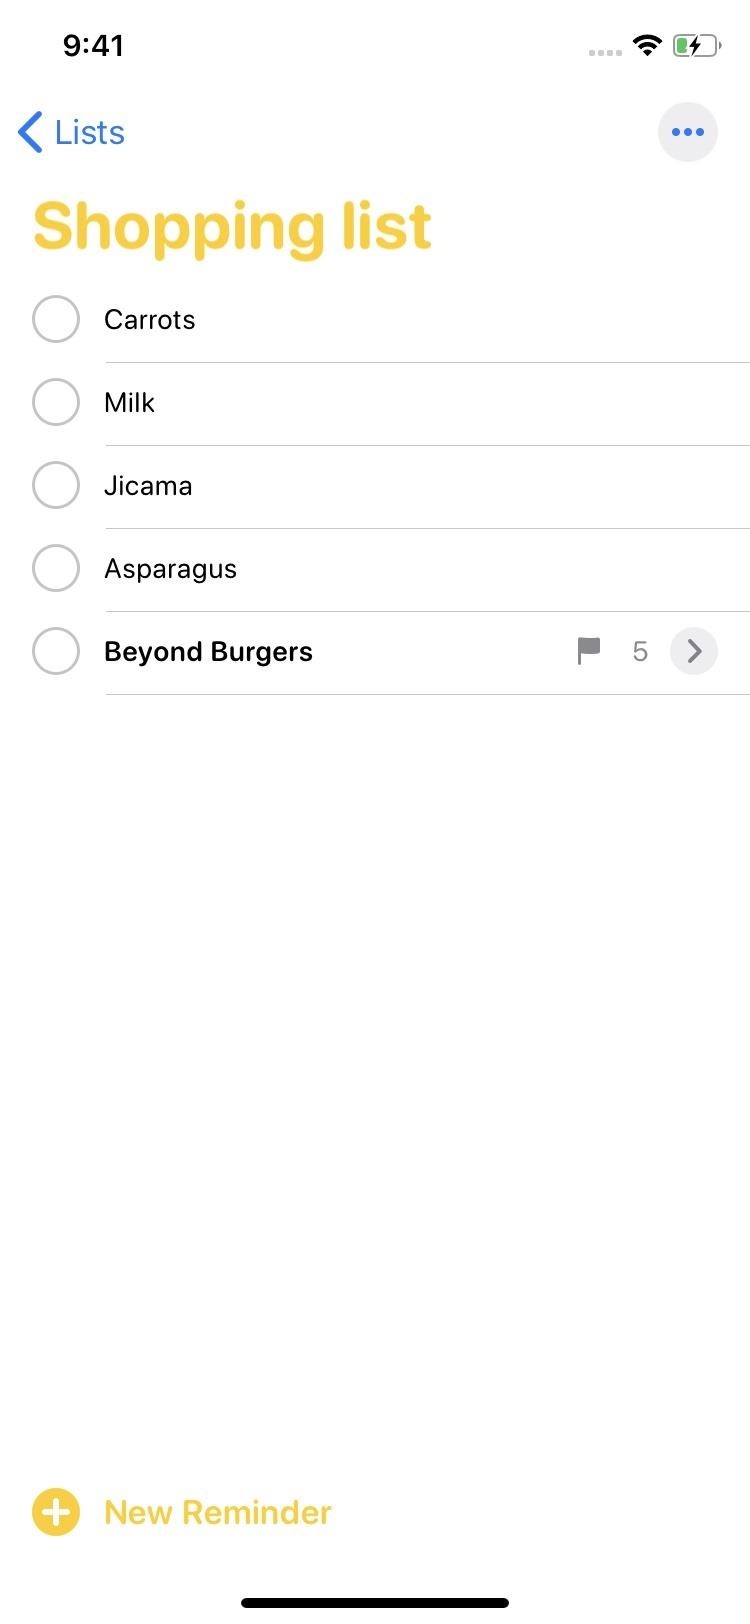 How to Create Nested Subtasks in iOS 13's Reminders App for More Organized To-Do Lists